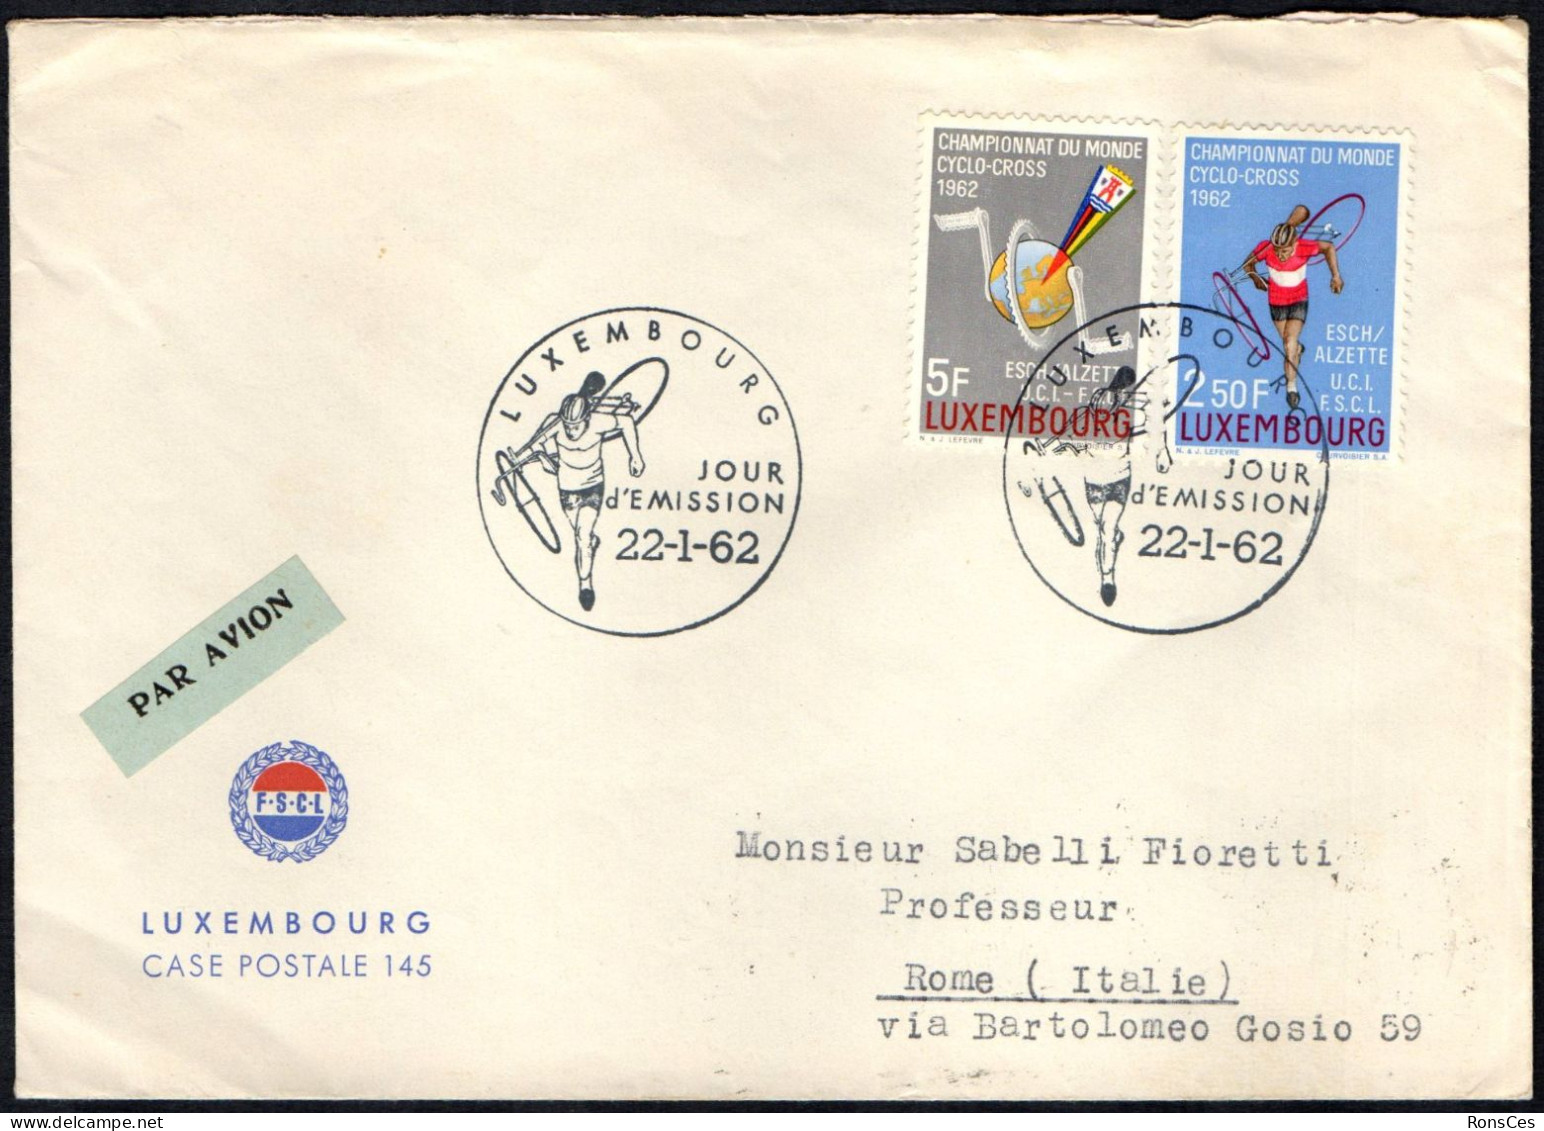 CYCLING - LUXEMBOURG 1962 - CHAMPIONNAT DU MONDE CYCLO-CROSS - MAILED FDC - A - Ciclismo